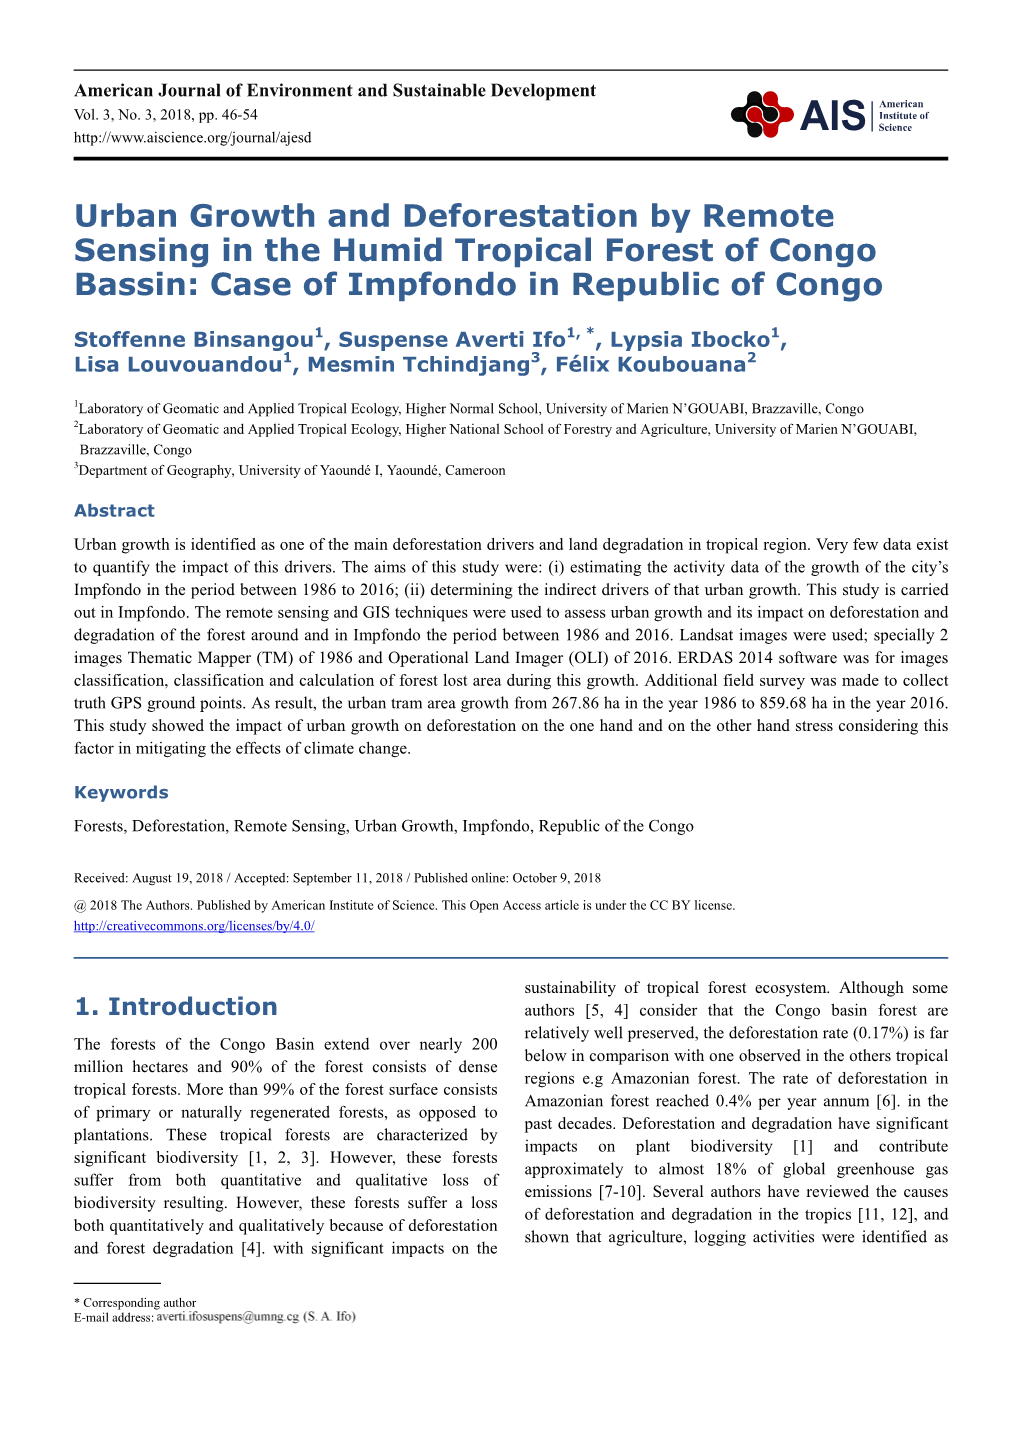 Urban Growth and Deforestation by Remote Sensing in the Humid Tropical Forest of Congo Bassin: Case of Impfondo in Republic of Congo